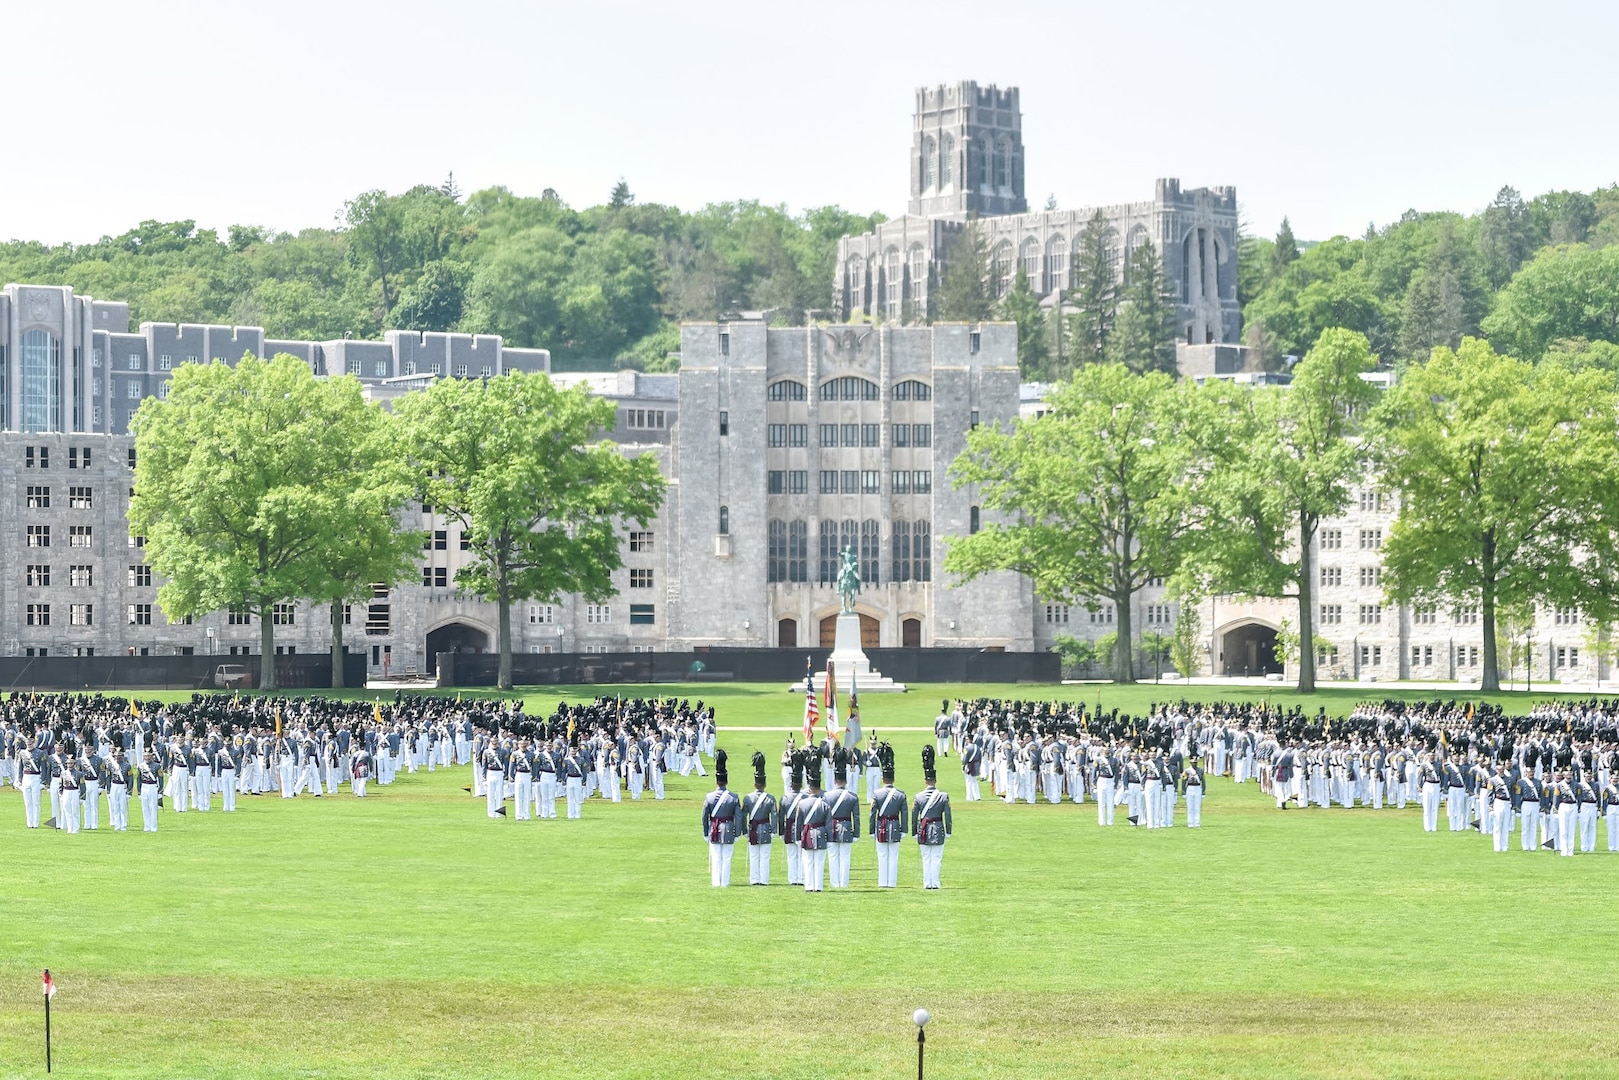 Chairman Stresses Change, Tradition at West Point Graduation > Joint